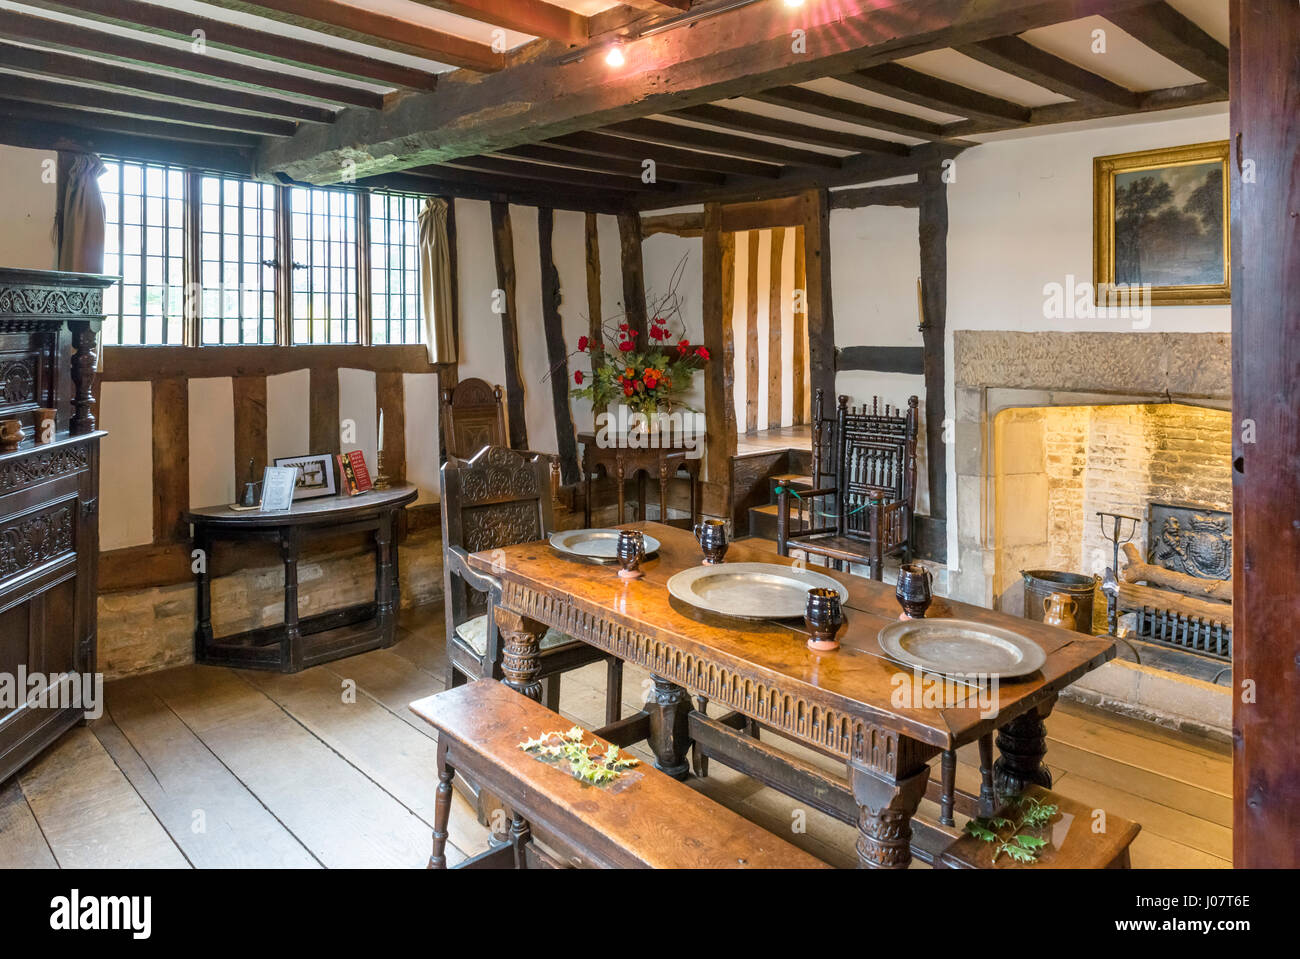 Hall's Croft. Interior of the house owned by William Shakespeare's daughter, Susanna Hal and her husband Dr John Hall, Stratford-upon-Avon, England, UK Stock Photo